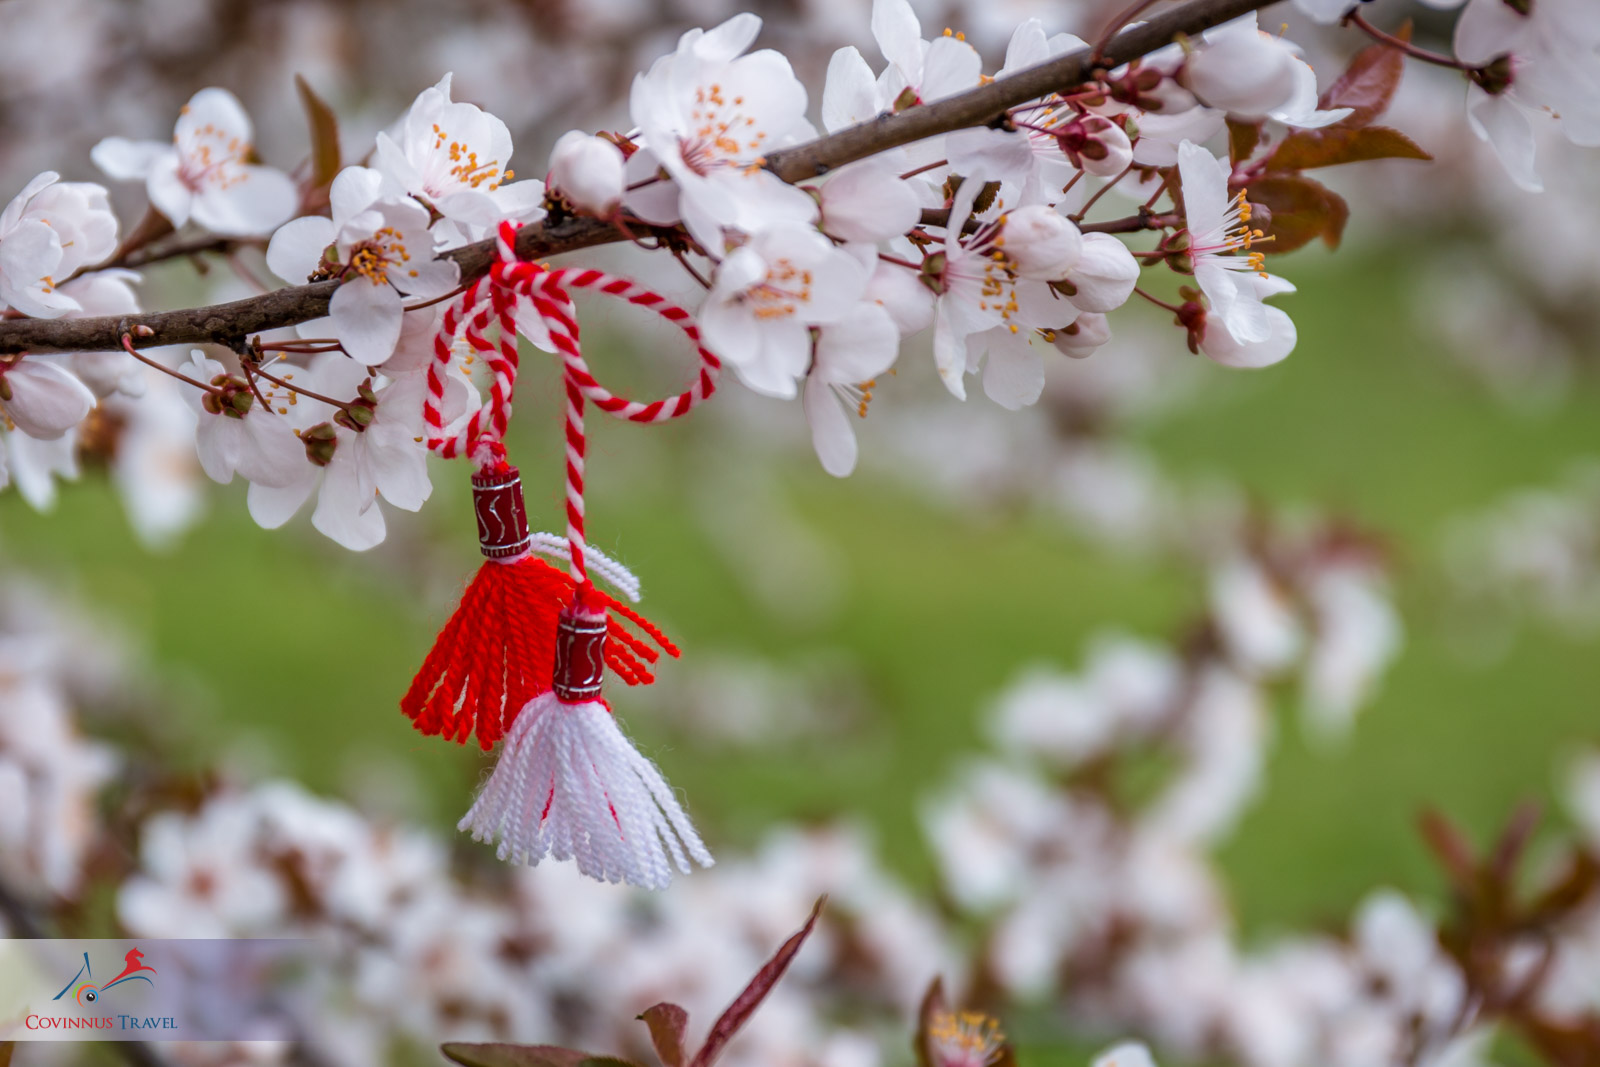 Martisor - March Charm - Covinnus Travel. Tours of Romania and Eastern Europe